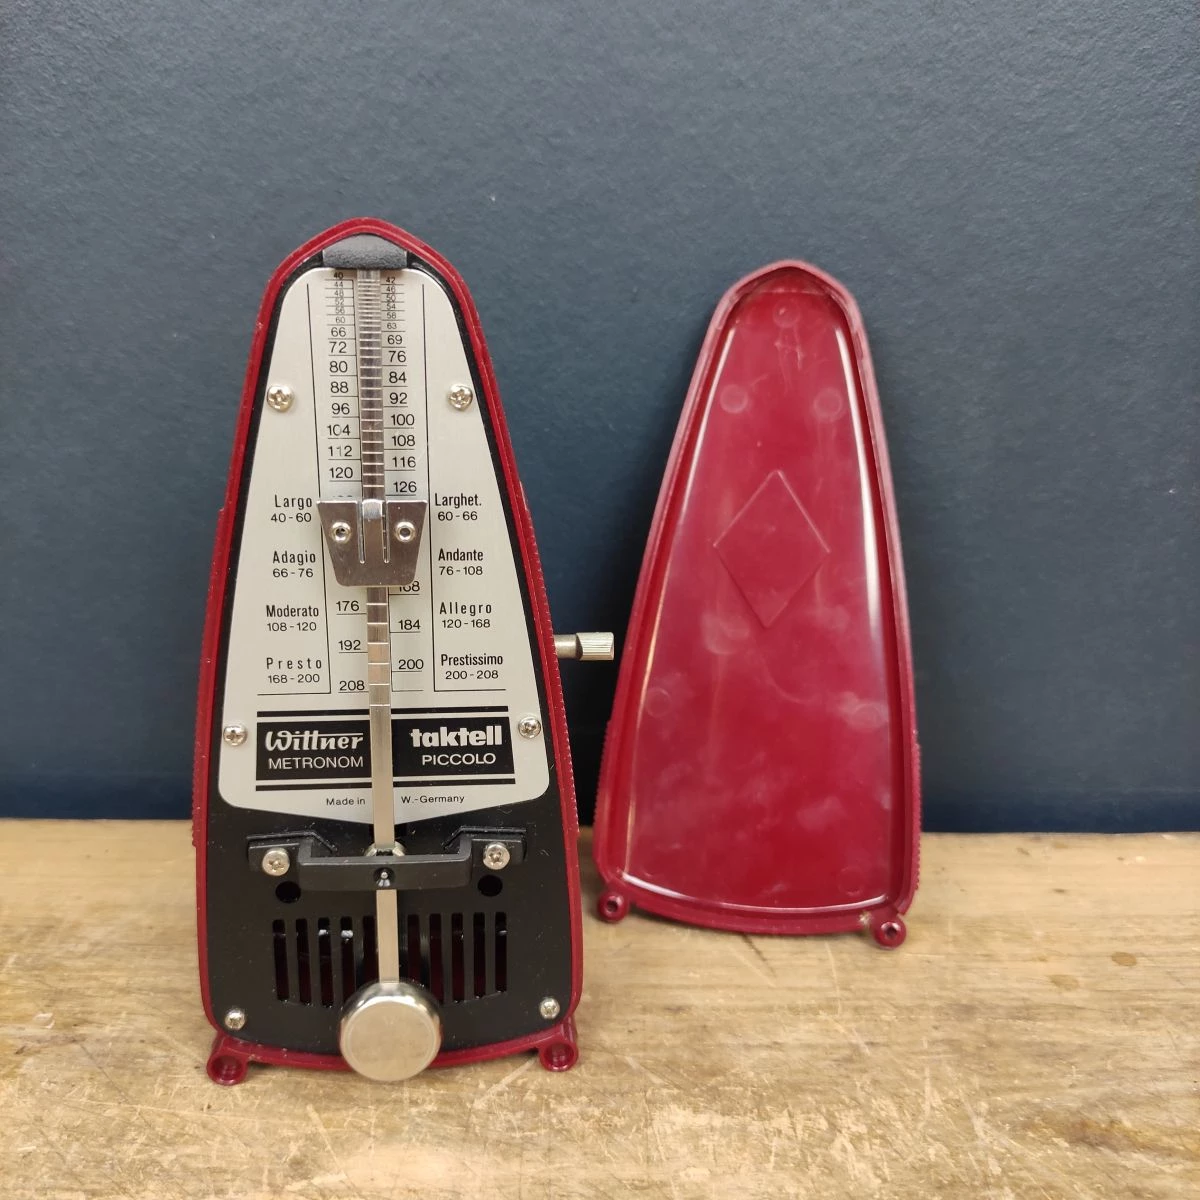 METRONOME MECANIQUE VINTAGE WITTNER TAKTELL PICCOLO MADE IN